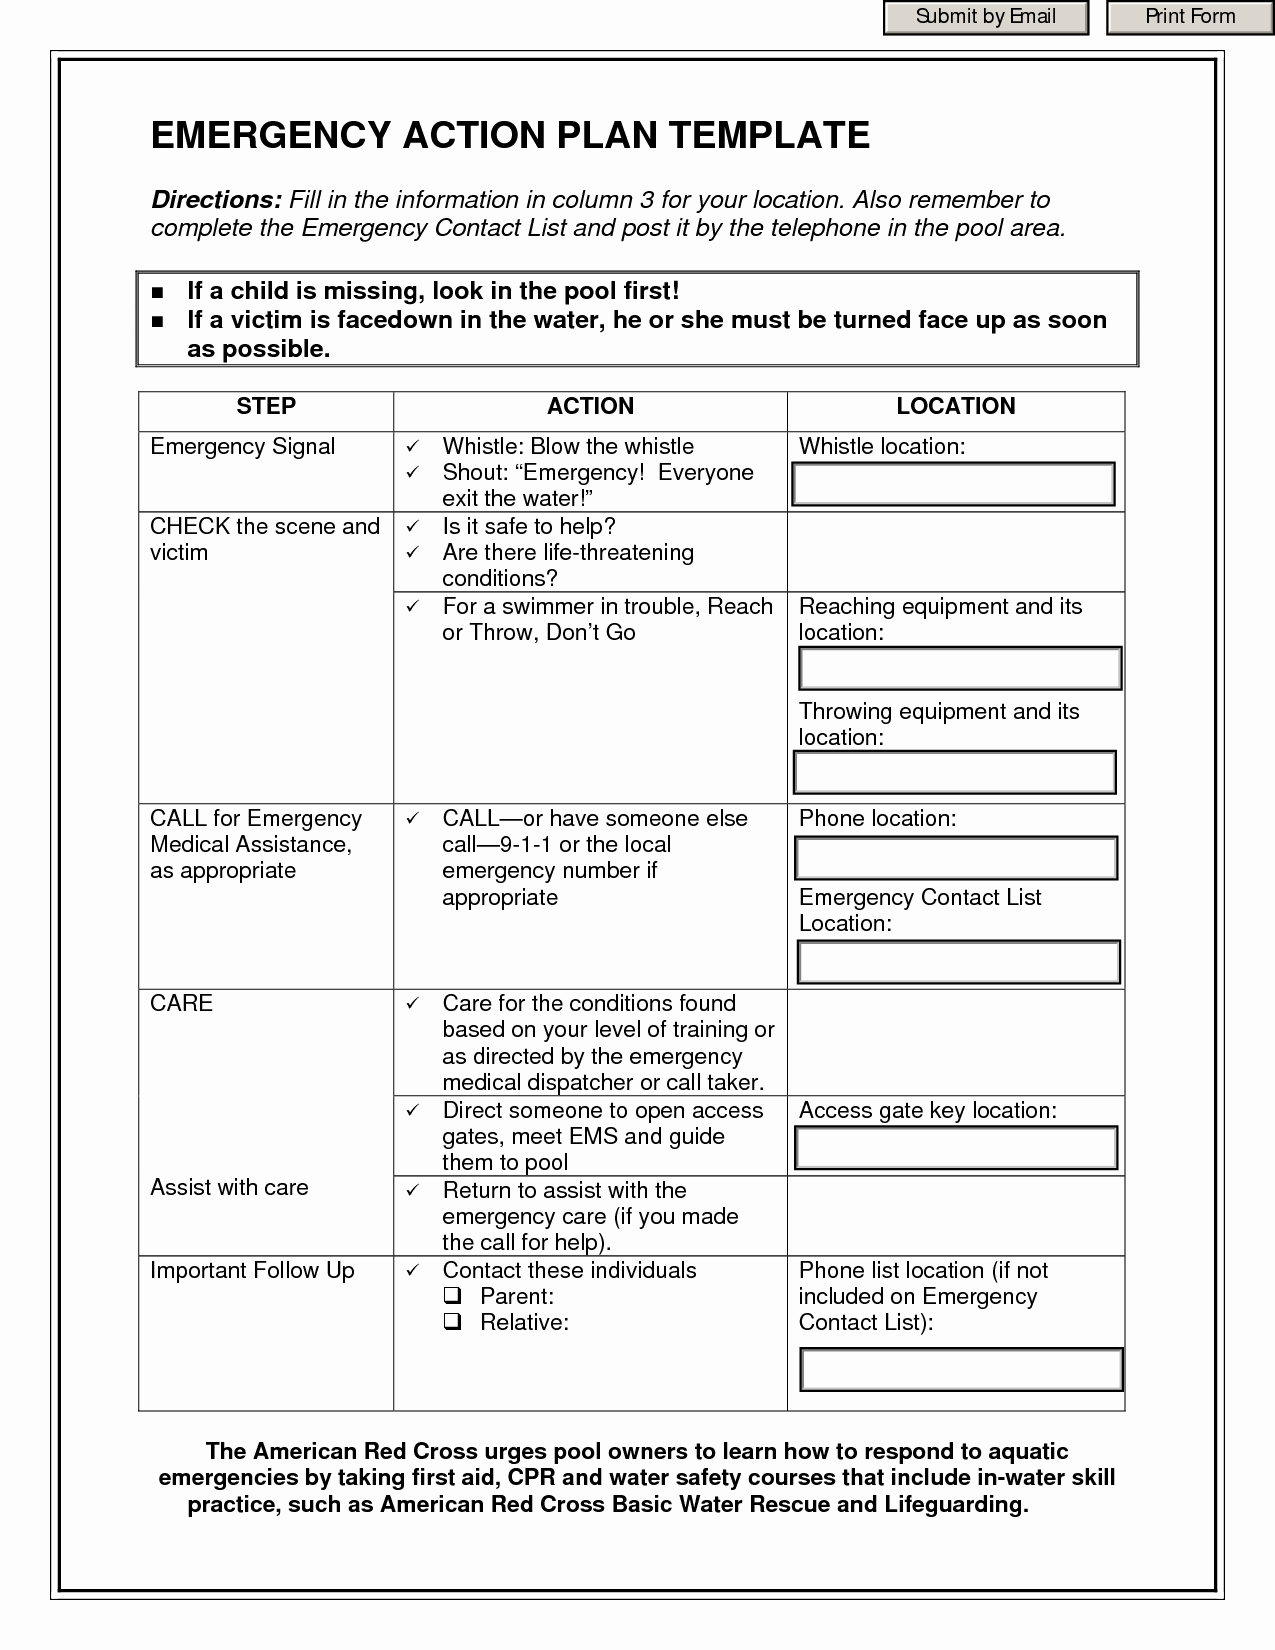 Emergency Action Plan Template Awesome Emergency Action Plan Template